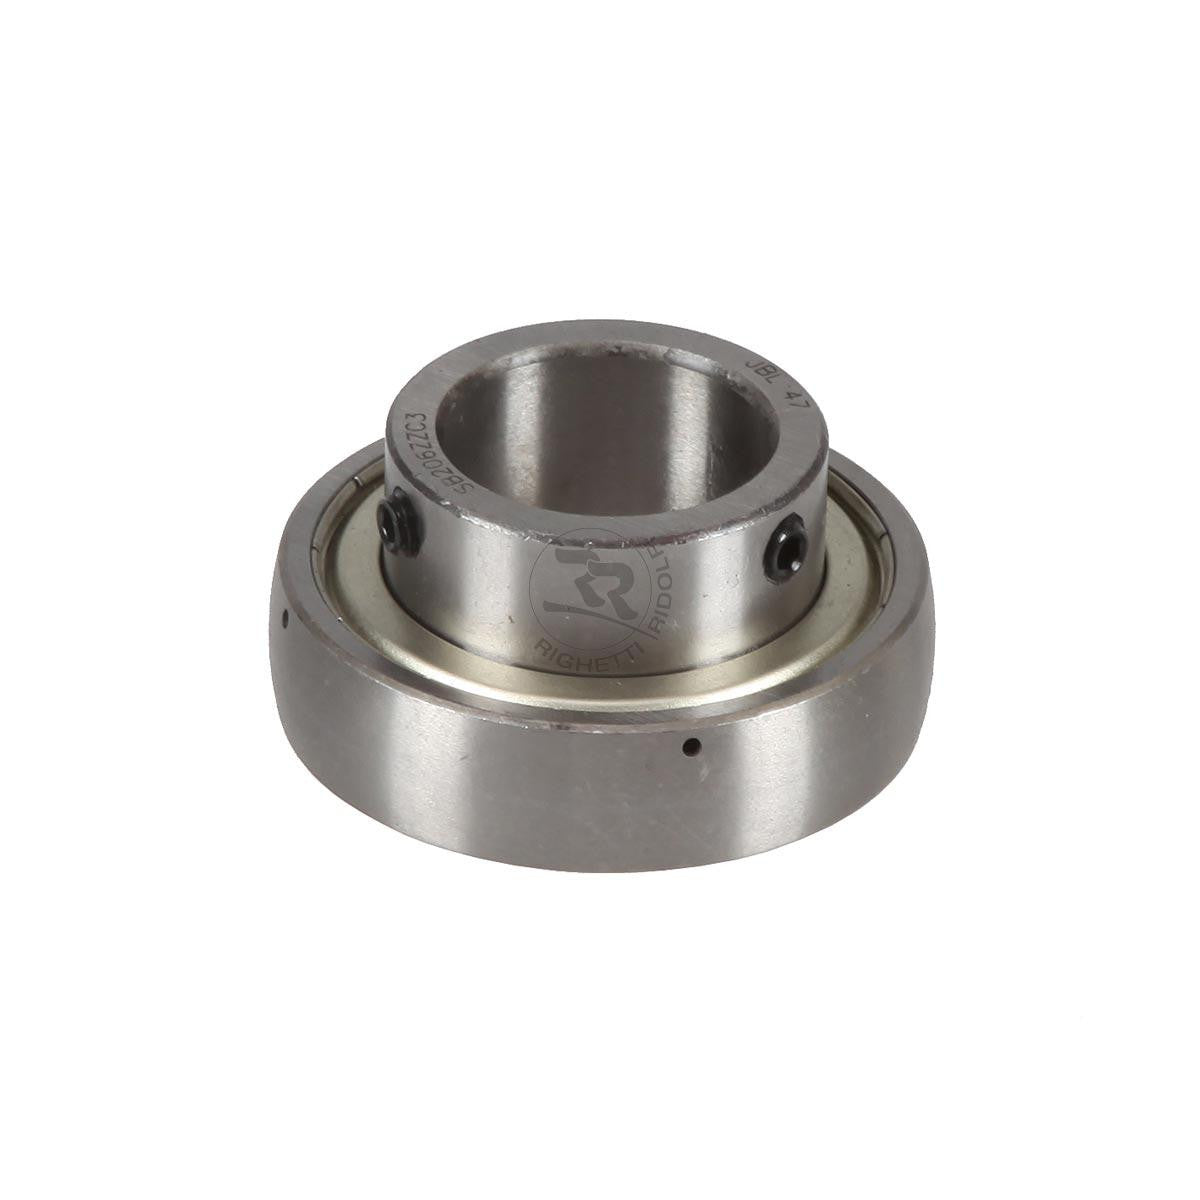 BEARING FOR 30mm AXLE